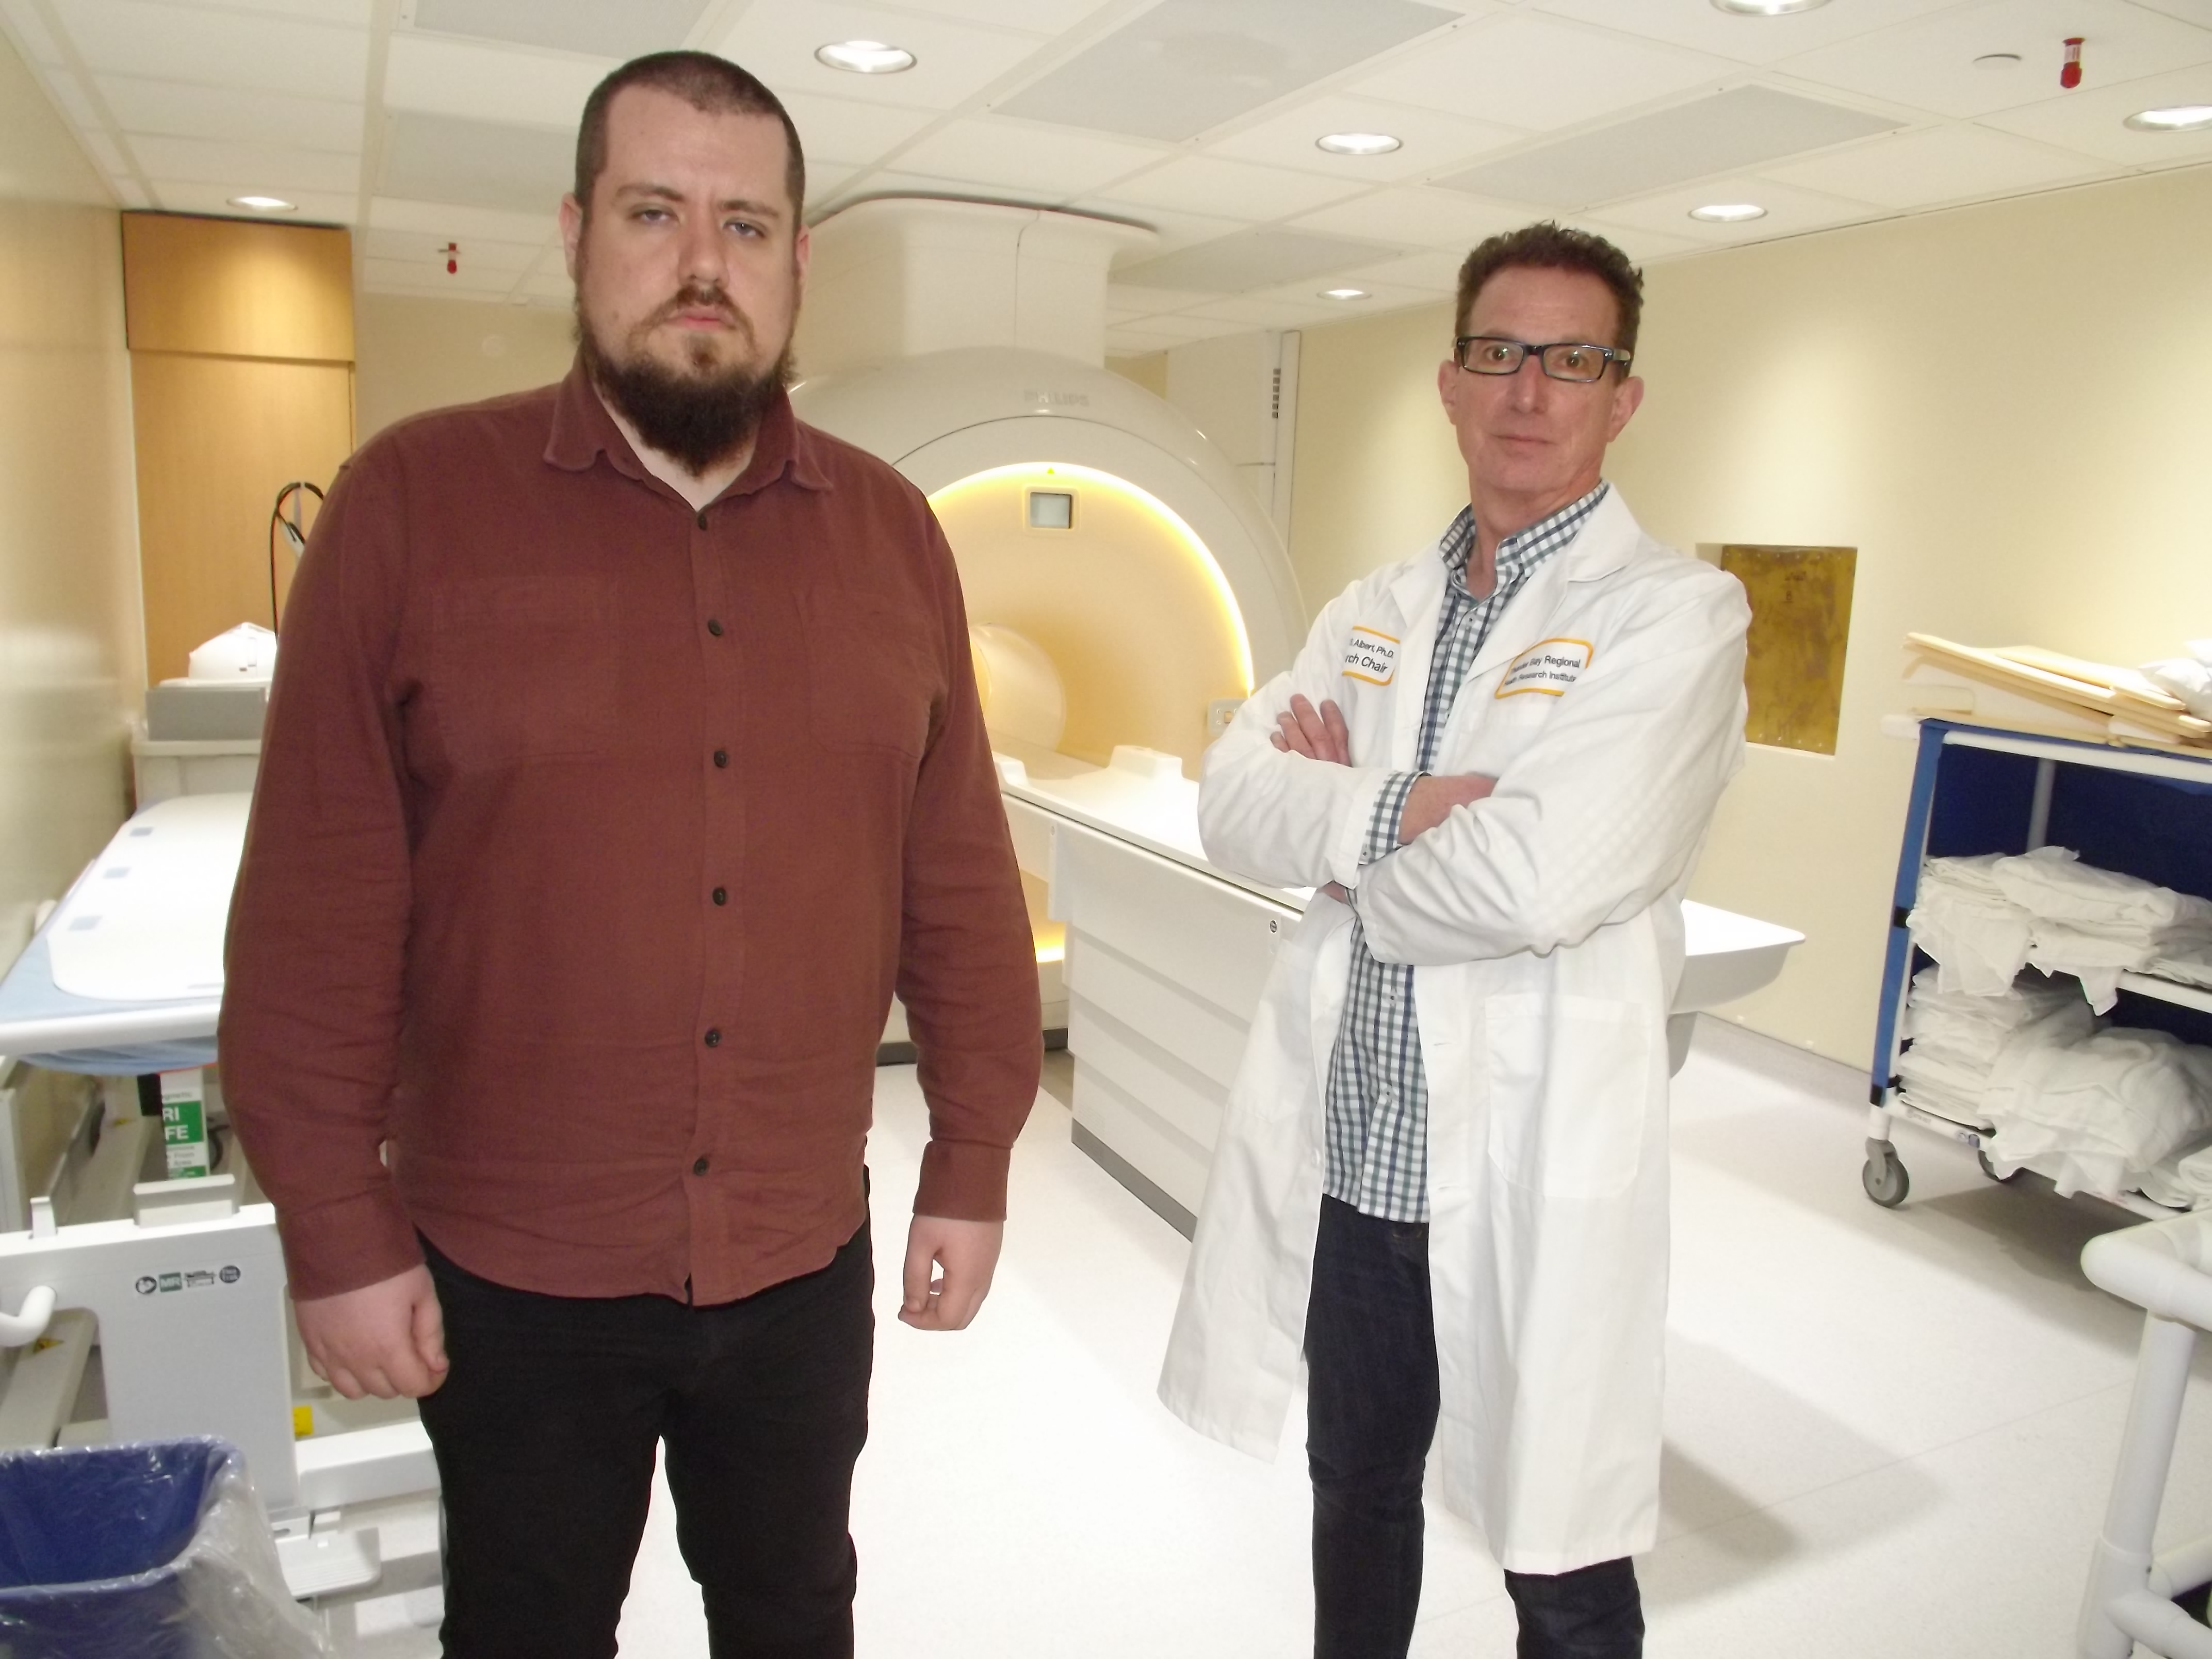 Dr. Mitchell Albert has been working on a medical imaging technique that uses xenon in MRIs. Here, Albert, right, is shown in front of an MRI scanner with Dr. Yurii Shepelytskyi